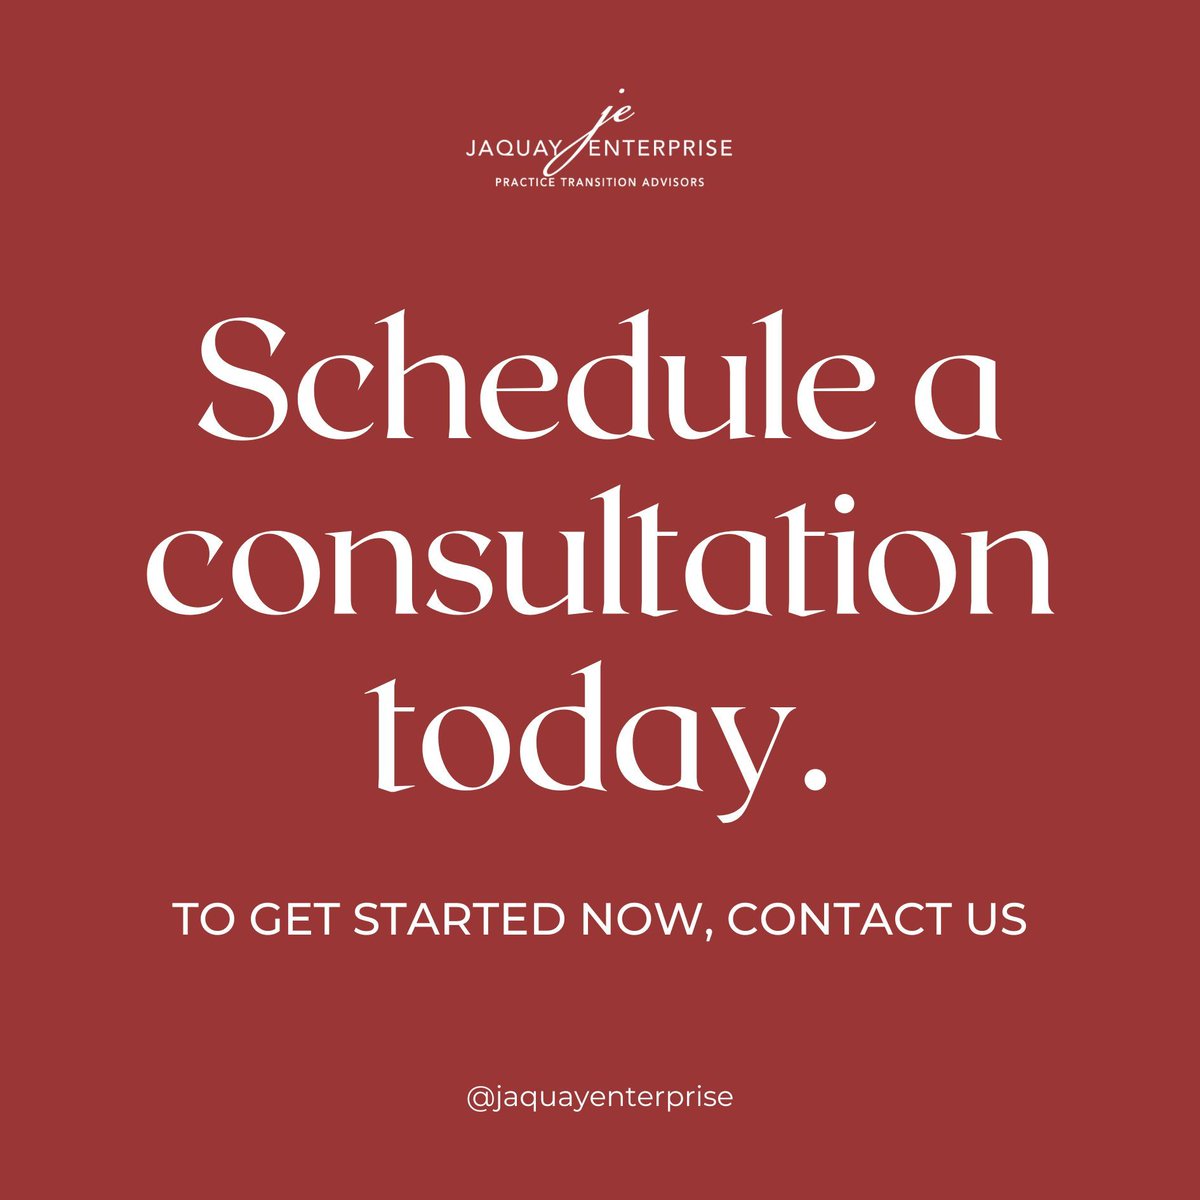 Ready to take your business to new heights? Schedule your complimentary consultation with Jaquay Enterprise today!

#ConsultWithJaquay #BusinessGoals #UnlockOpportunities #JaquayConsults #DreamPlanAchieve #JaquayEnterprise #DentalTransitionAdvisors #PracticeTransitionAdvisors